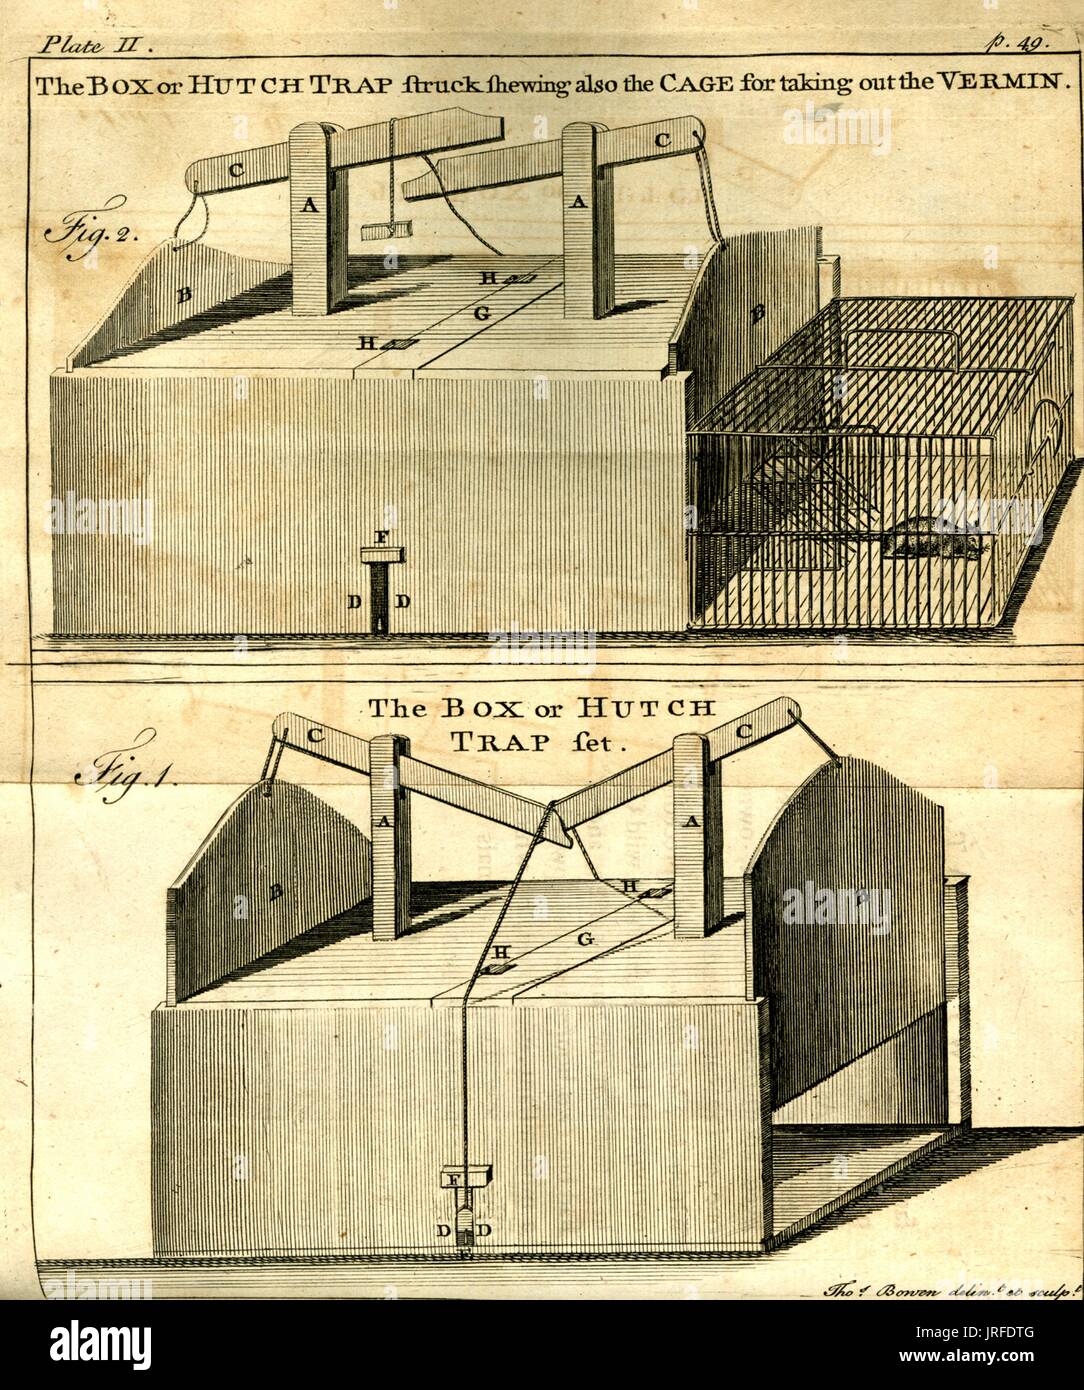 Better Mousetrap drawing, Technical diagrams of invention, a better  mousetrap, showing multiple methods which the trap uses to catch vermin,  1841 Stock Photo - Alamy